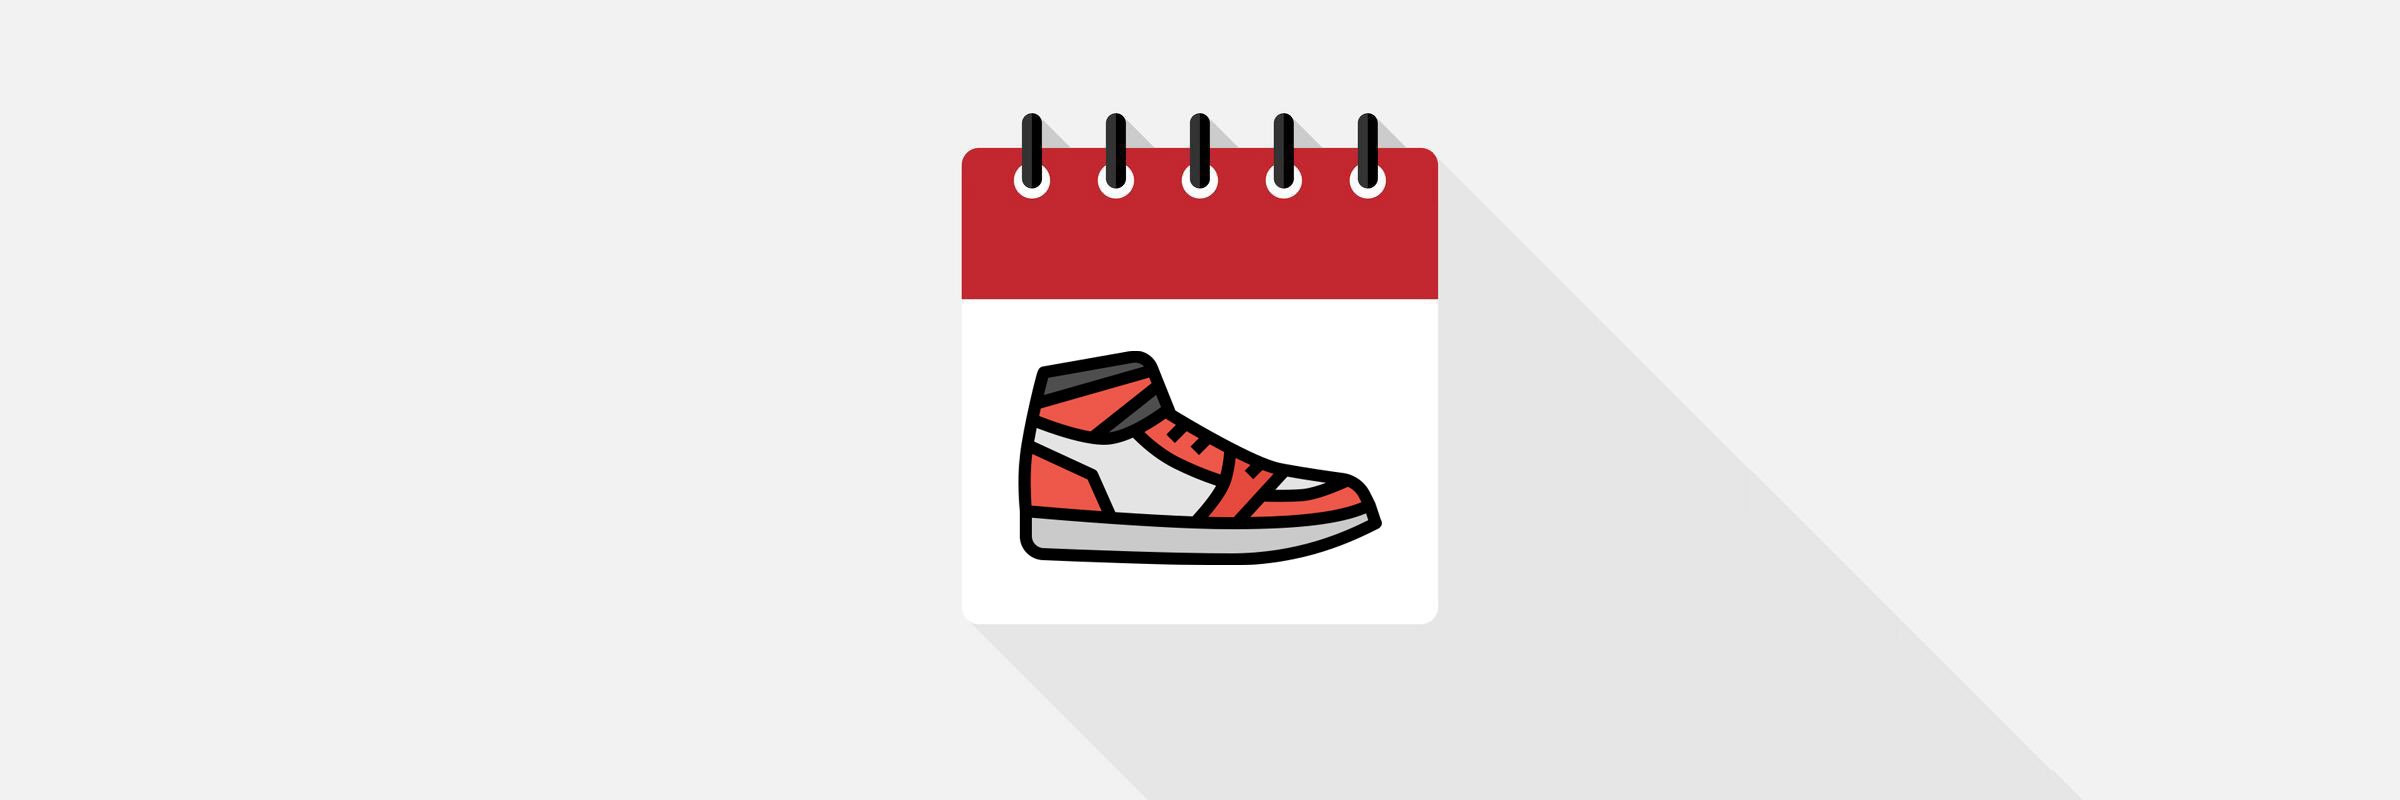 Monarchy Antagonist transmission Sneaker Release Dates for 2022 - Updated Daily | Nice Kicks